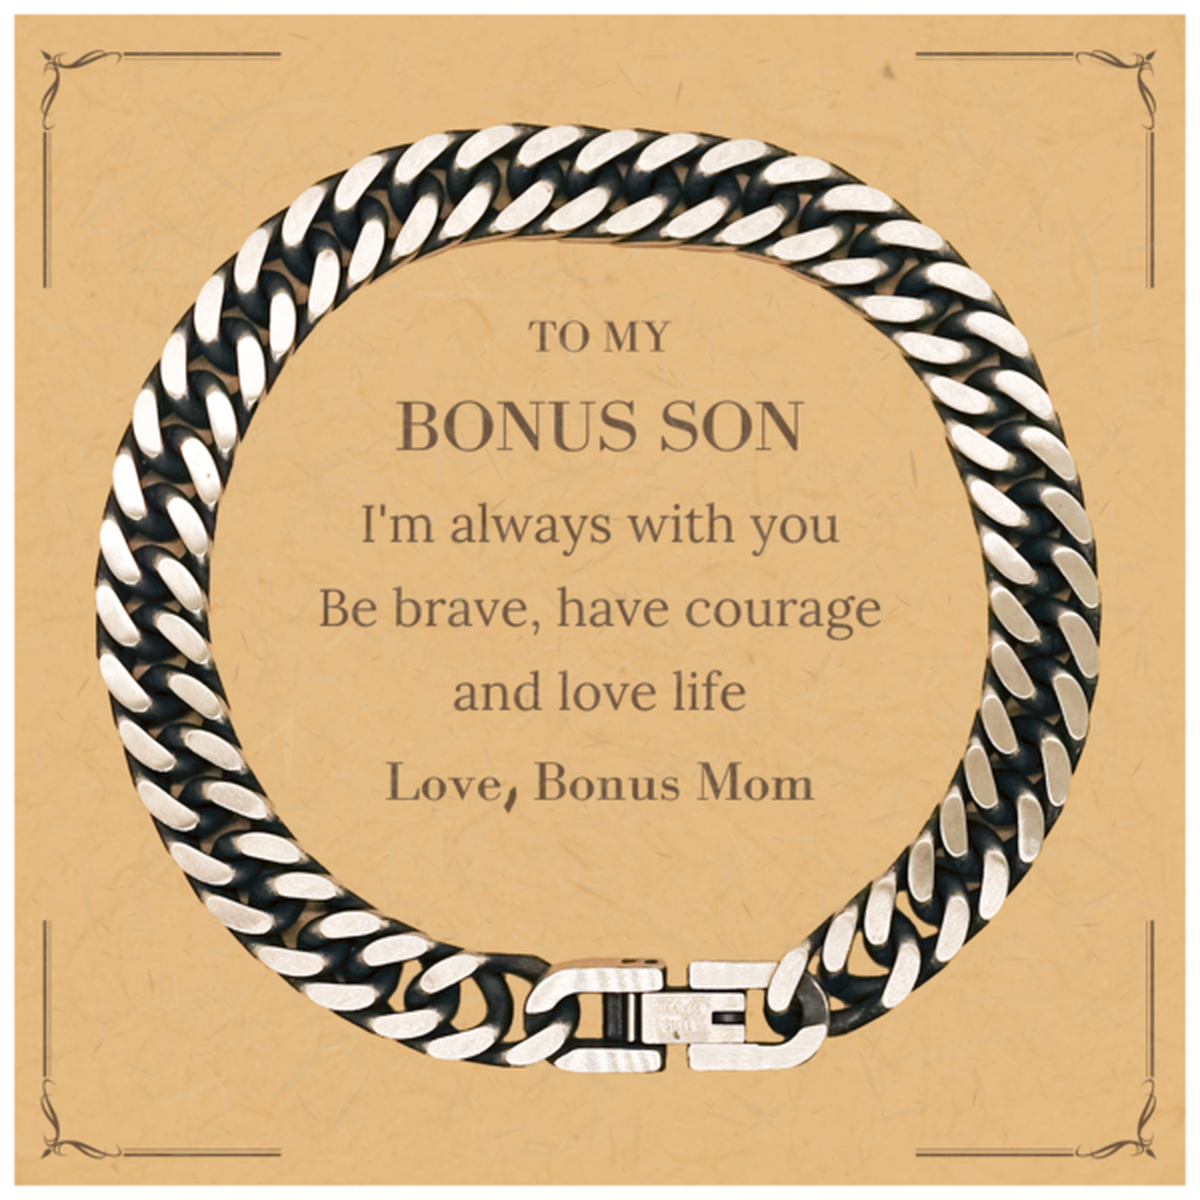 To My Bonus Son Gifts from Bonus Mom, Unique Cuban Link Chain Bracelet Inspirational Christmas Birthday Graduation Gifts for Bonus Son I'm always with you. Be brave, have courage and love life. Love, Bonus Mom